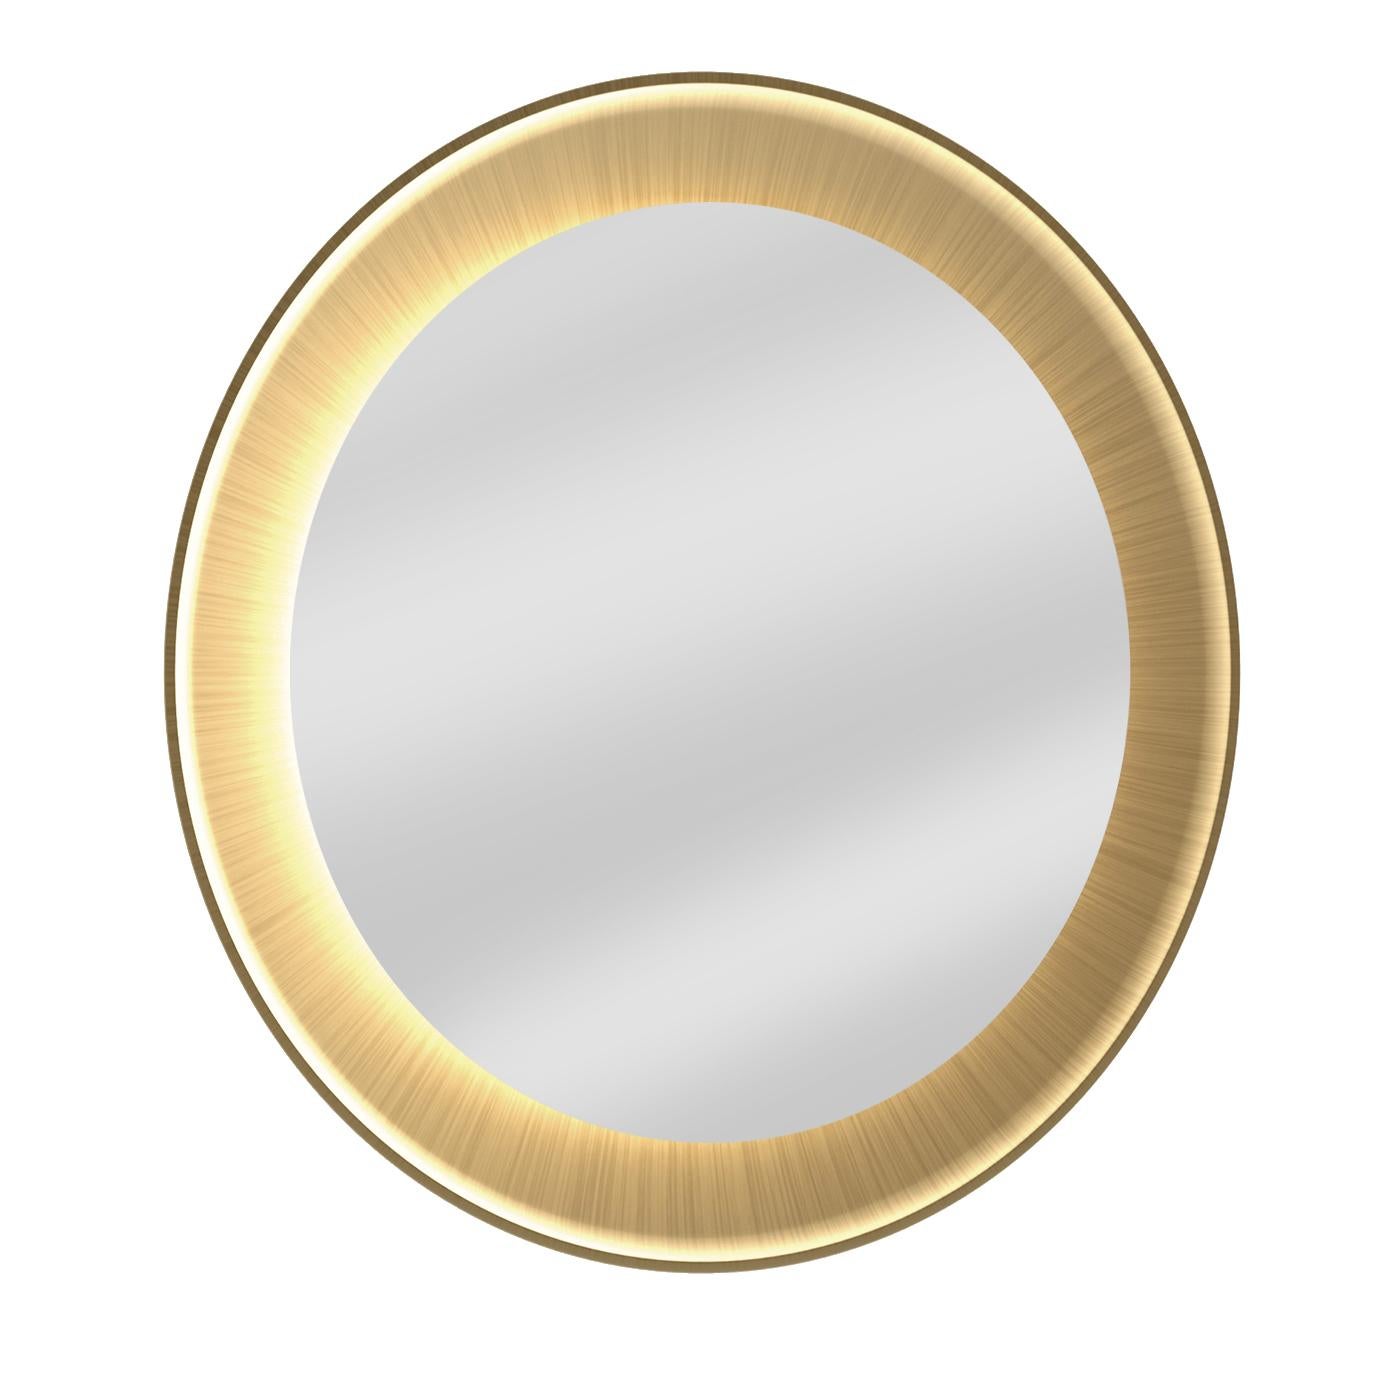 Distinctive for its linear silhouette and precious brass finish, this refined piece boasts an MDF frame enclosing the beveled round mirror, which is enriched by a circular strip of bright LED lights. This wall mirror can be painted in several colors